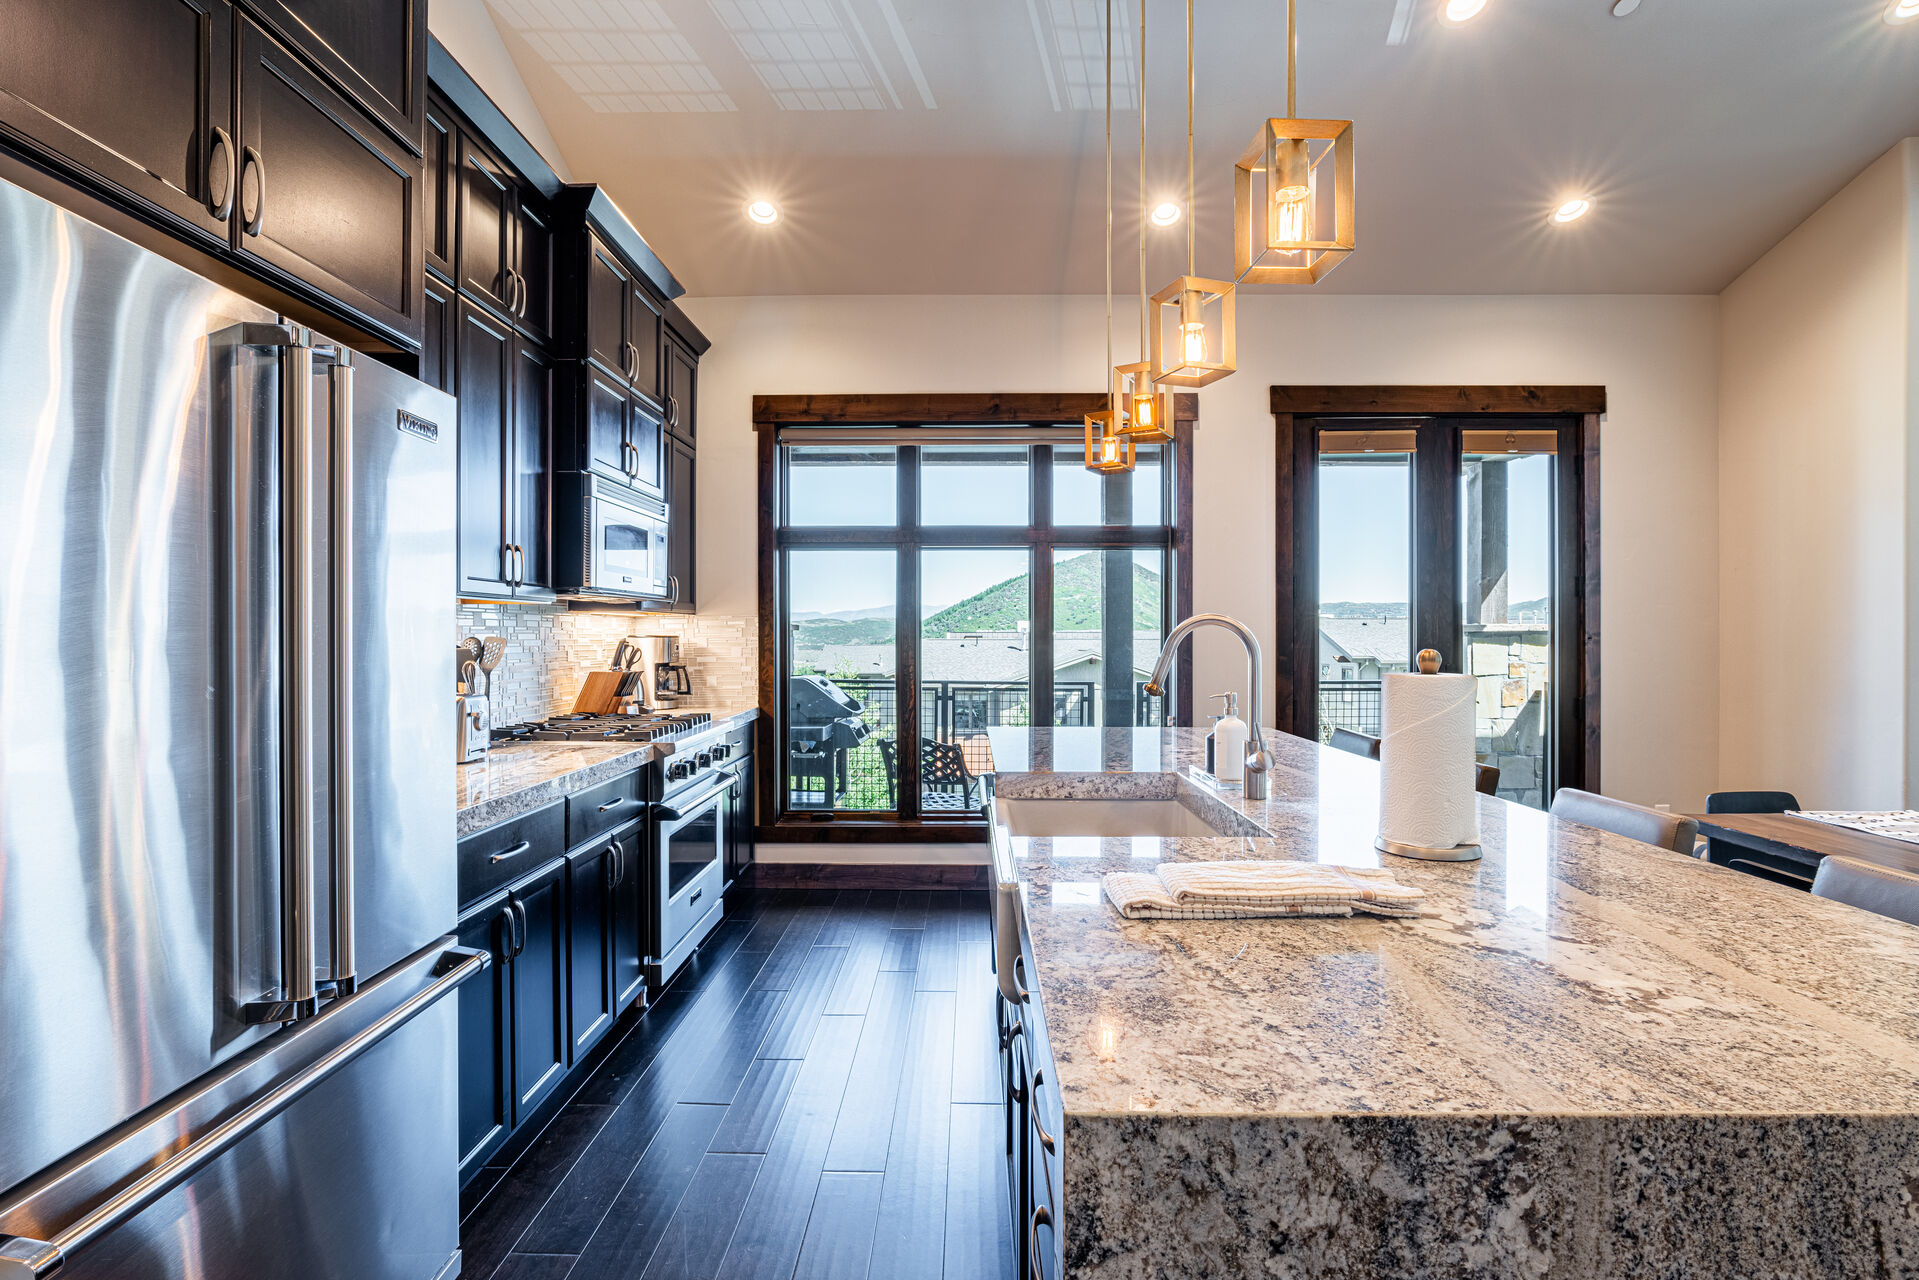 Gourmet kitchen with Viking appliances and views